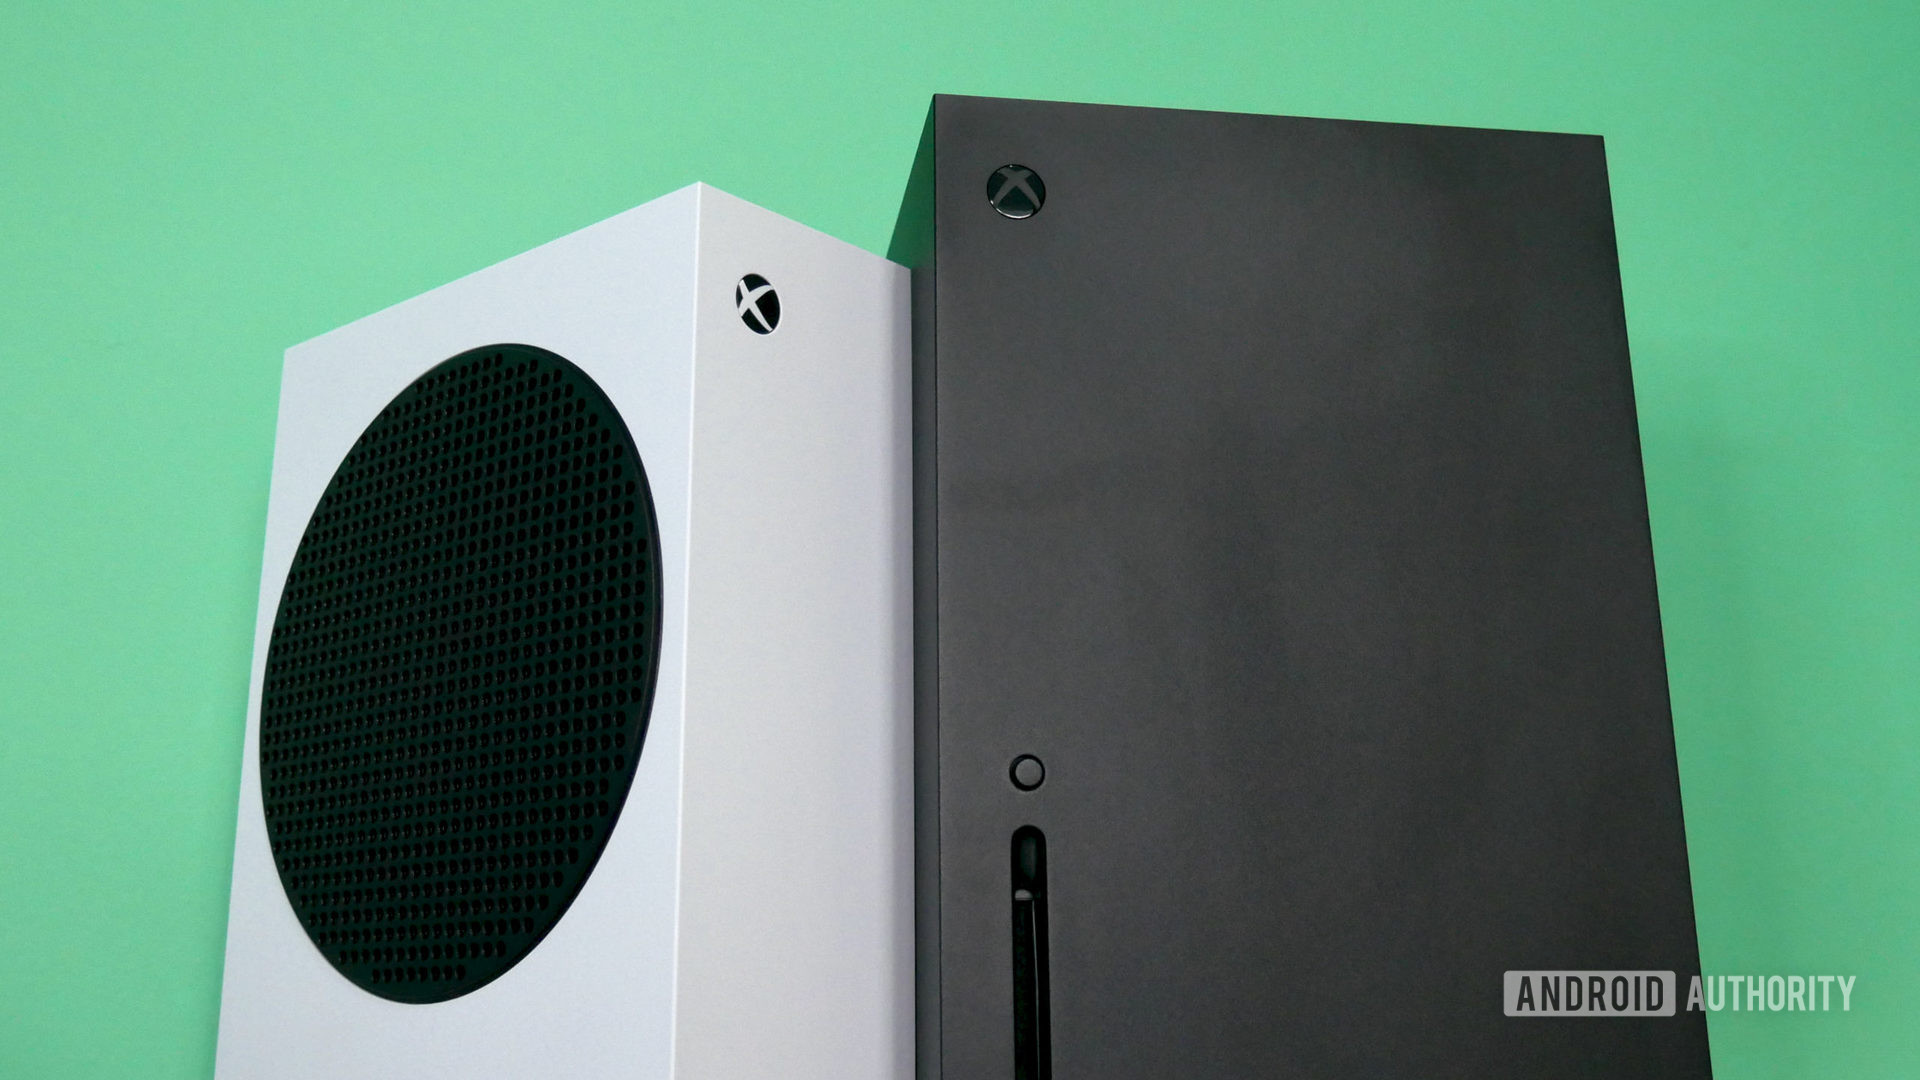 Xbox Series X vs Xbox Series S: What's the difference?